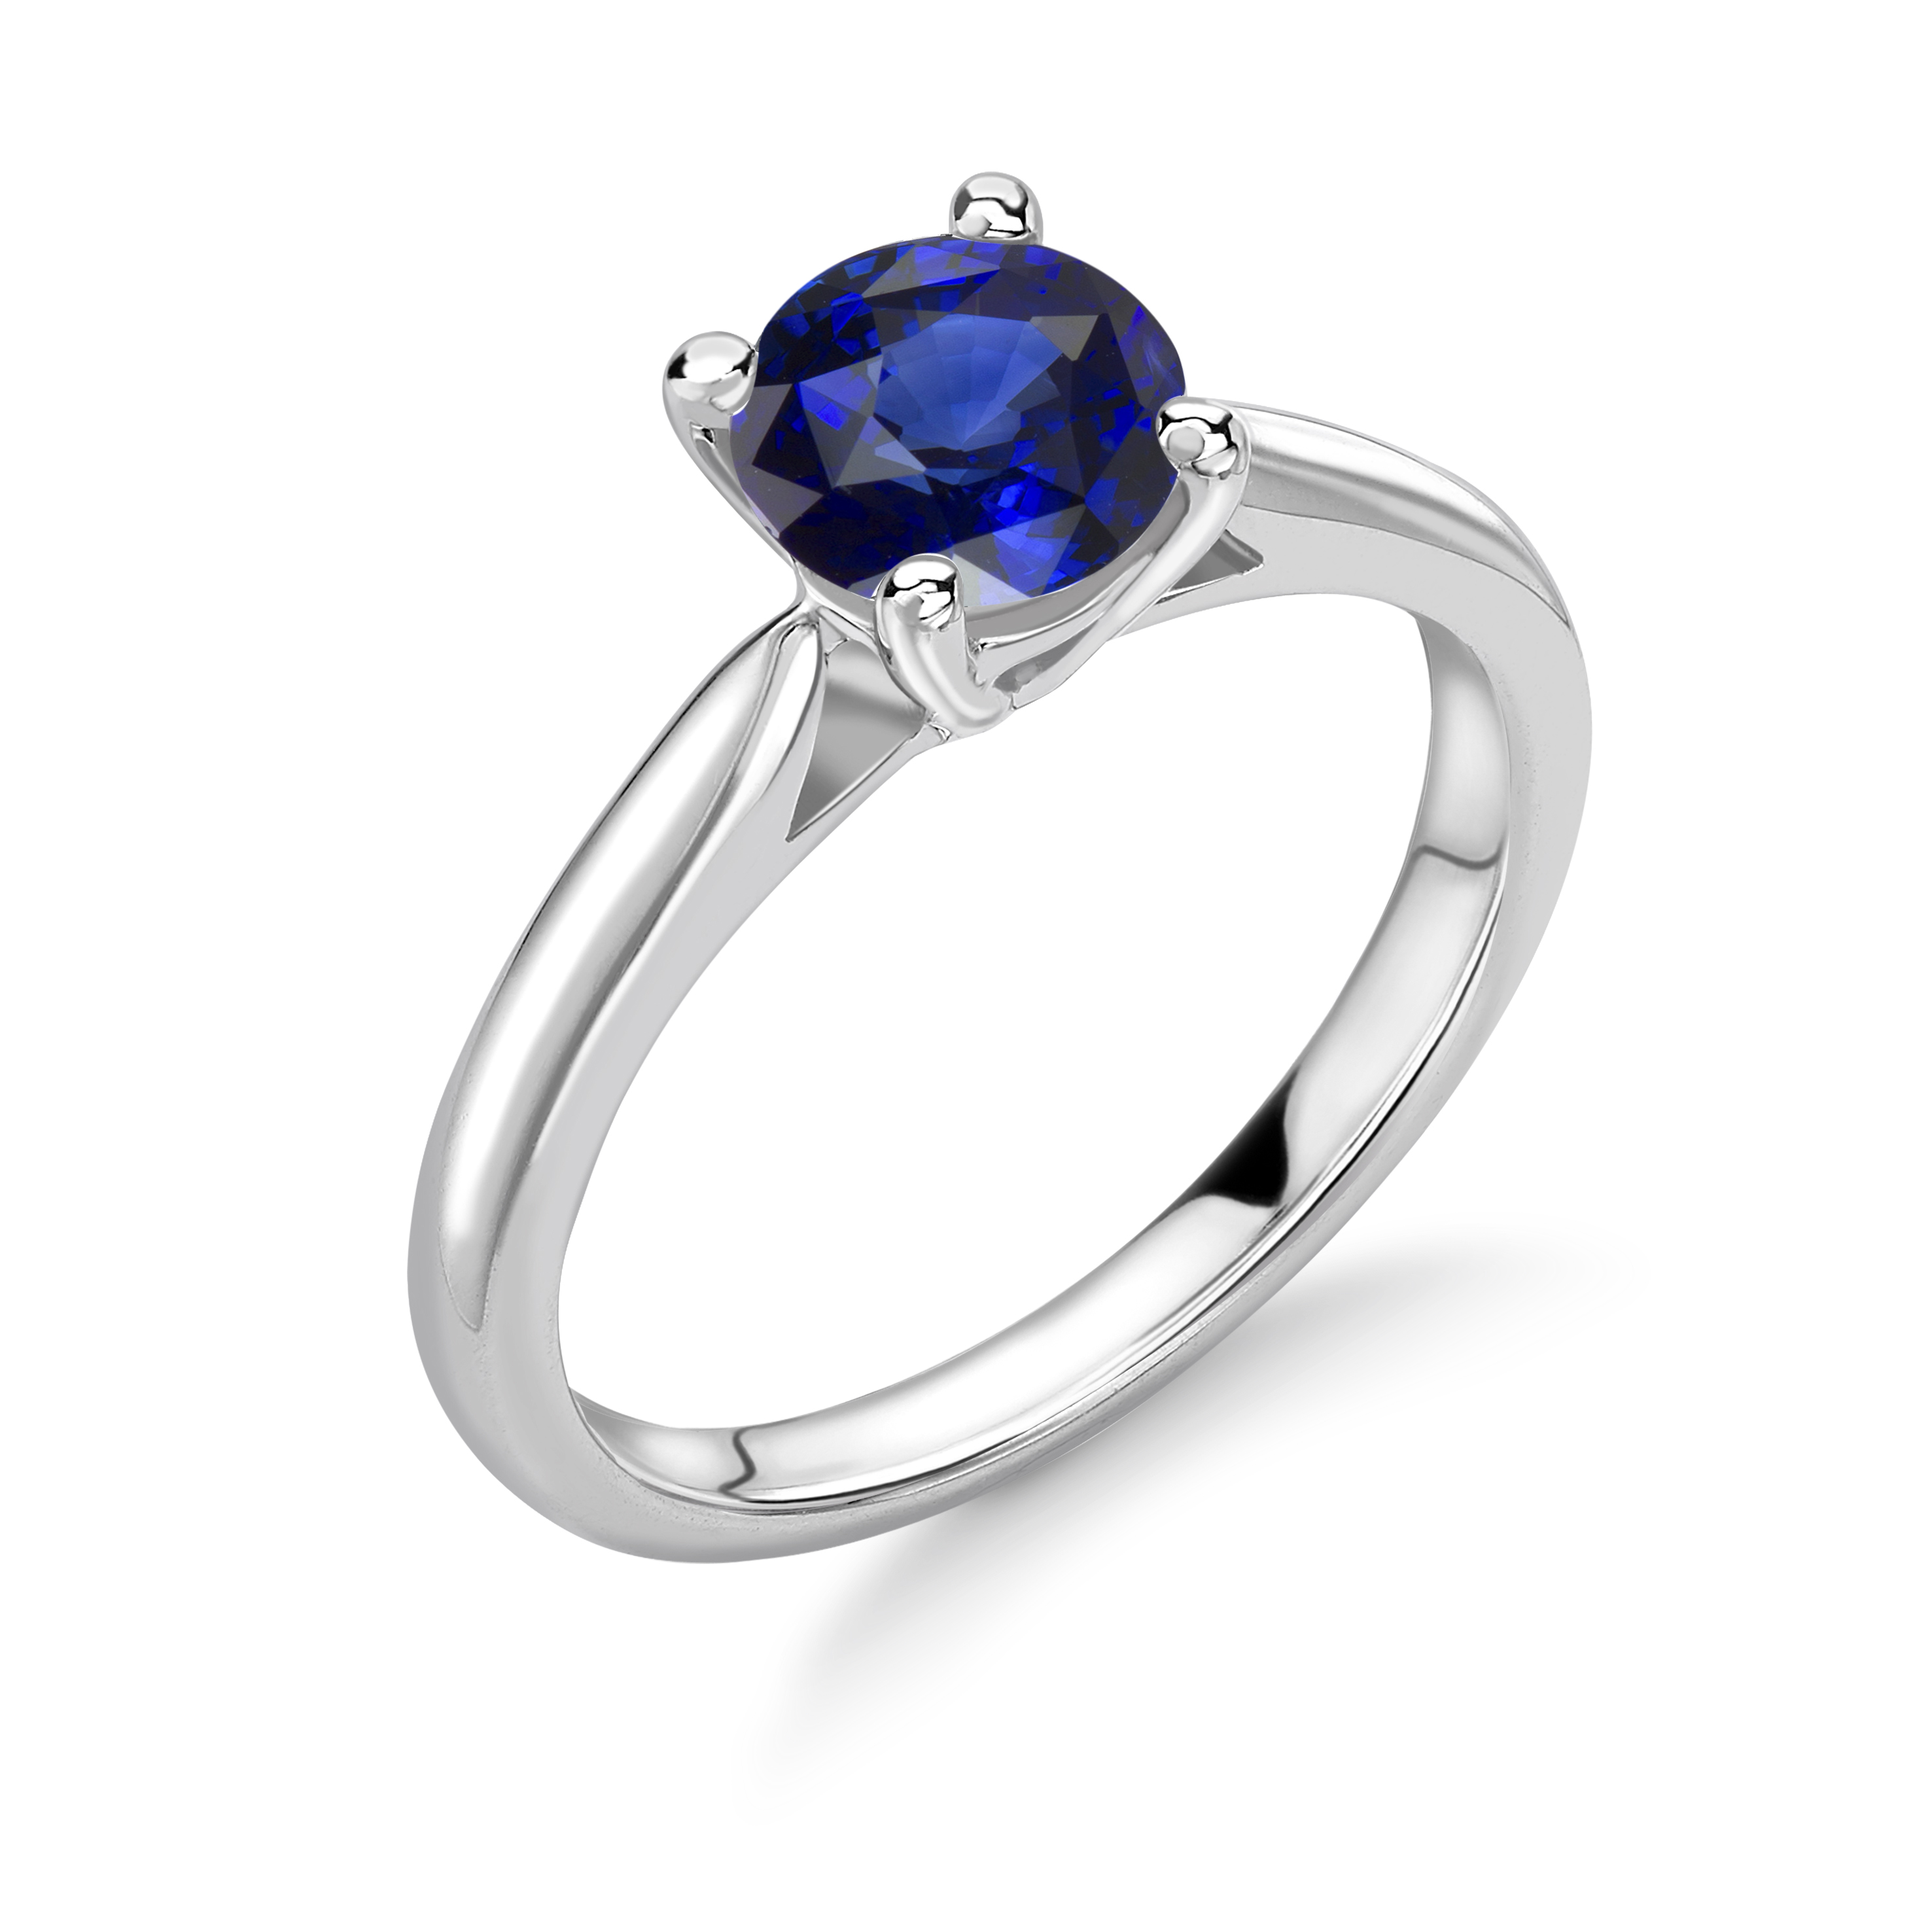 Classci Design 4 Prong Setting Round Solitaire Sapphire Engagement Rings